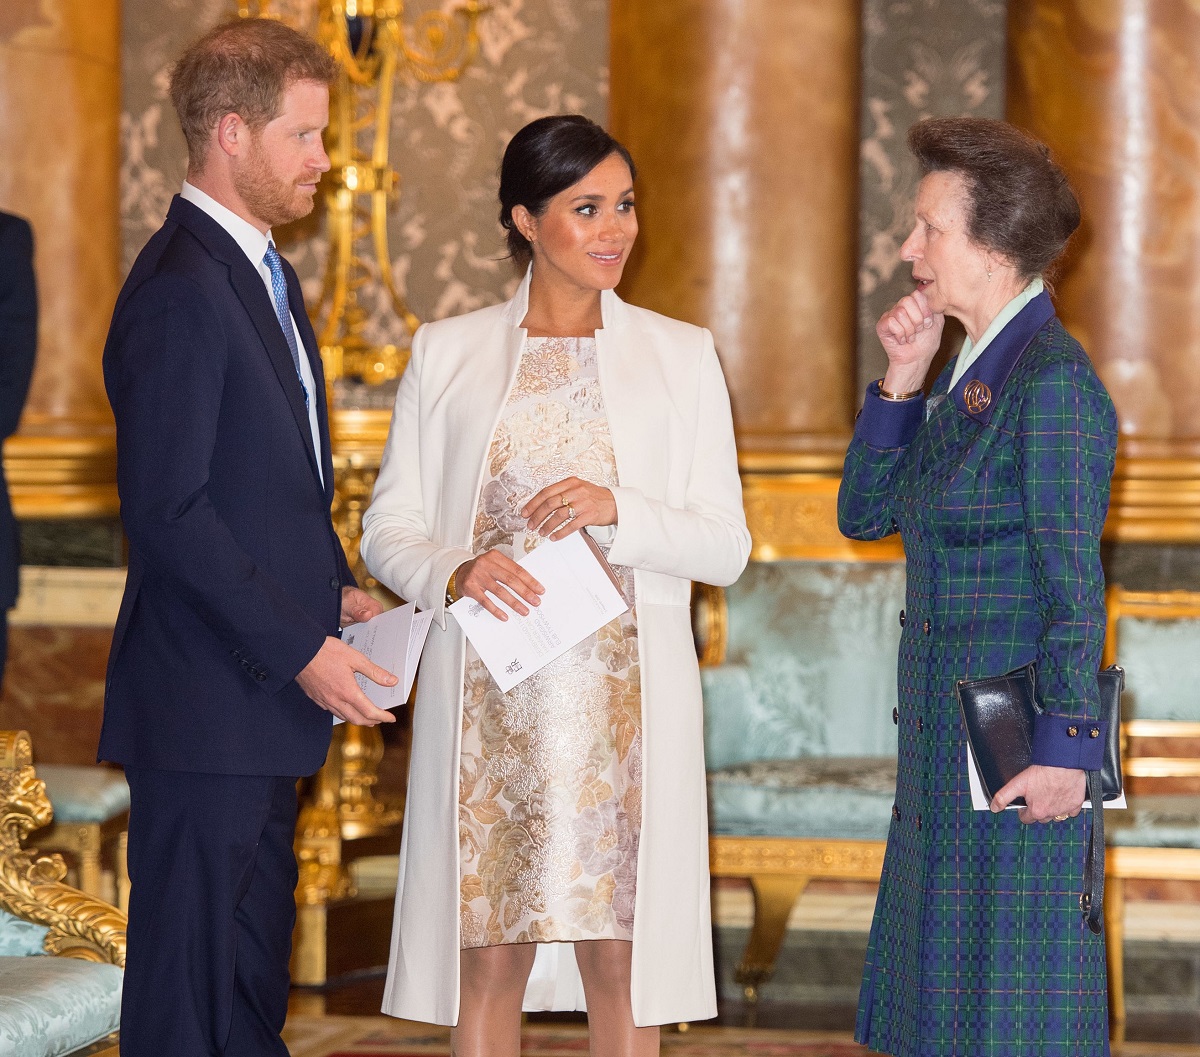 Prince Harry, Meghan Markle, and Princess Anne having a conversation during a reception at Buckingham Palace